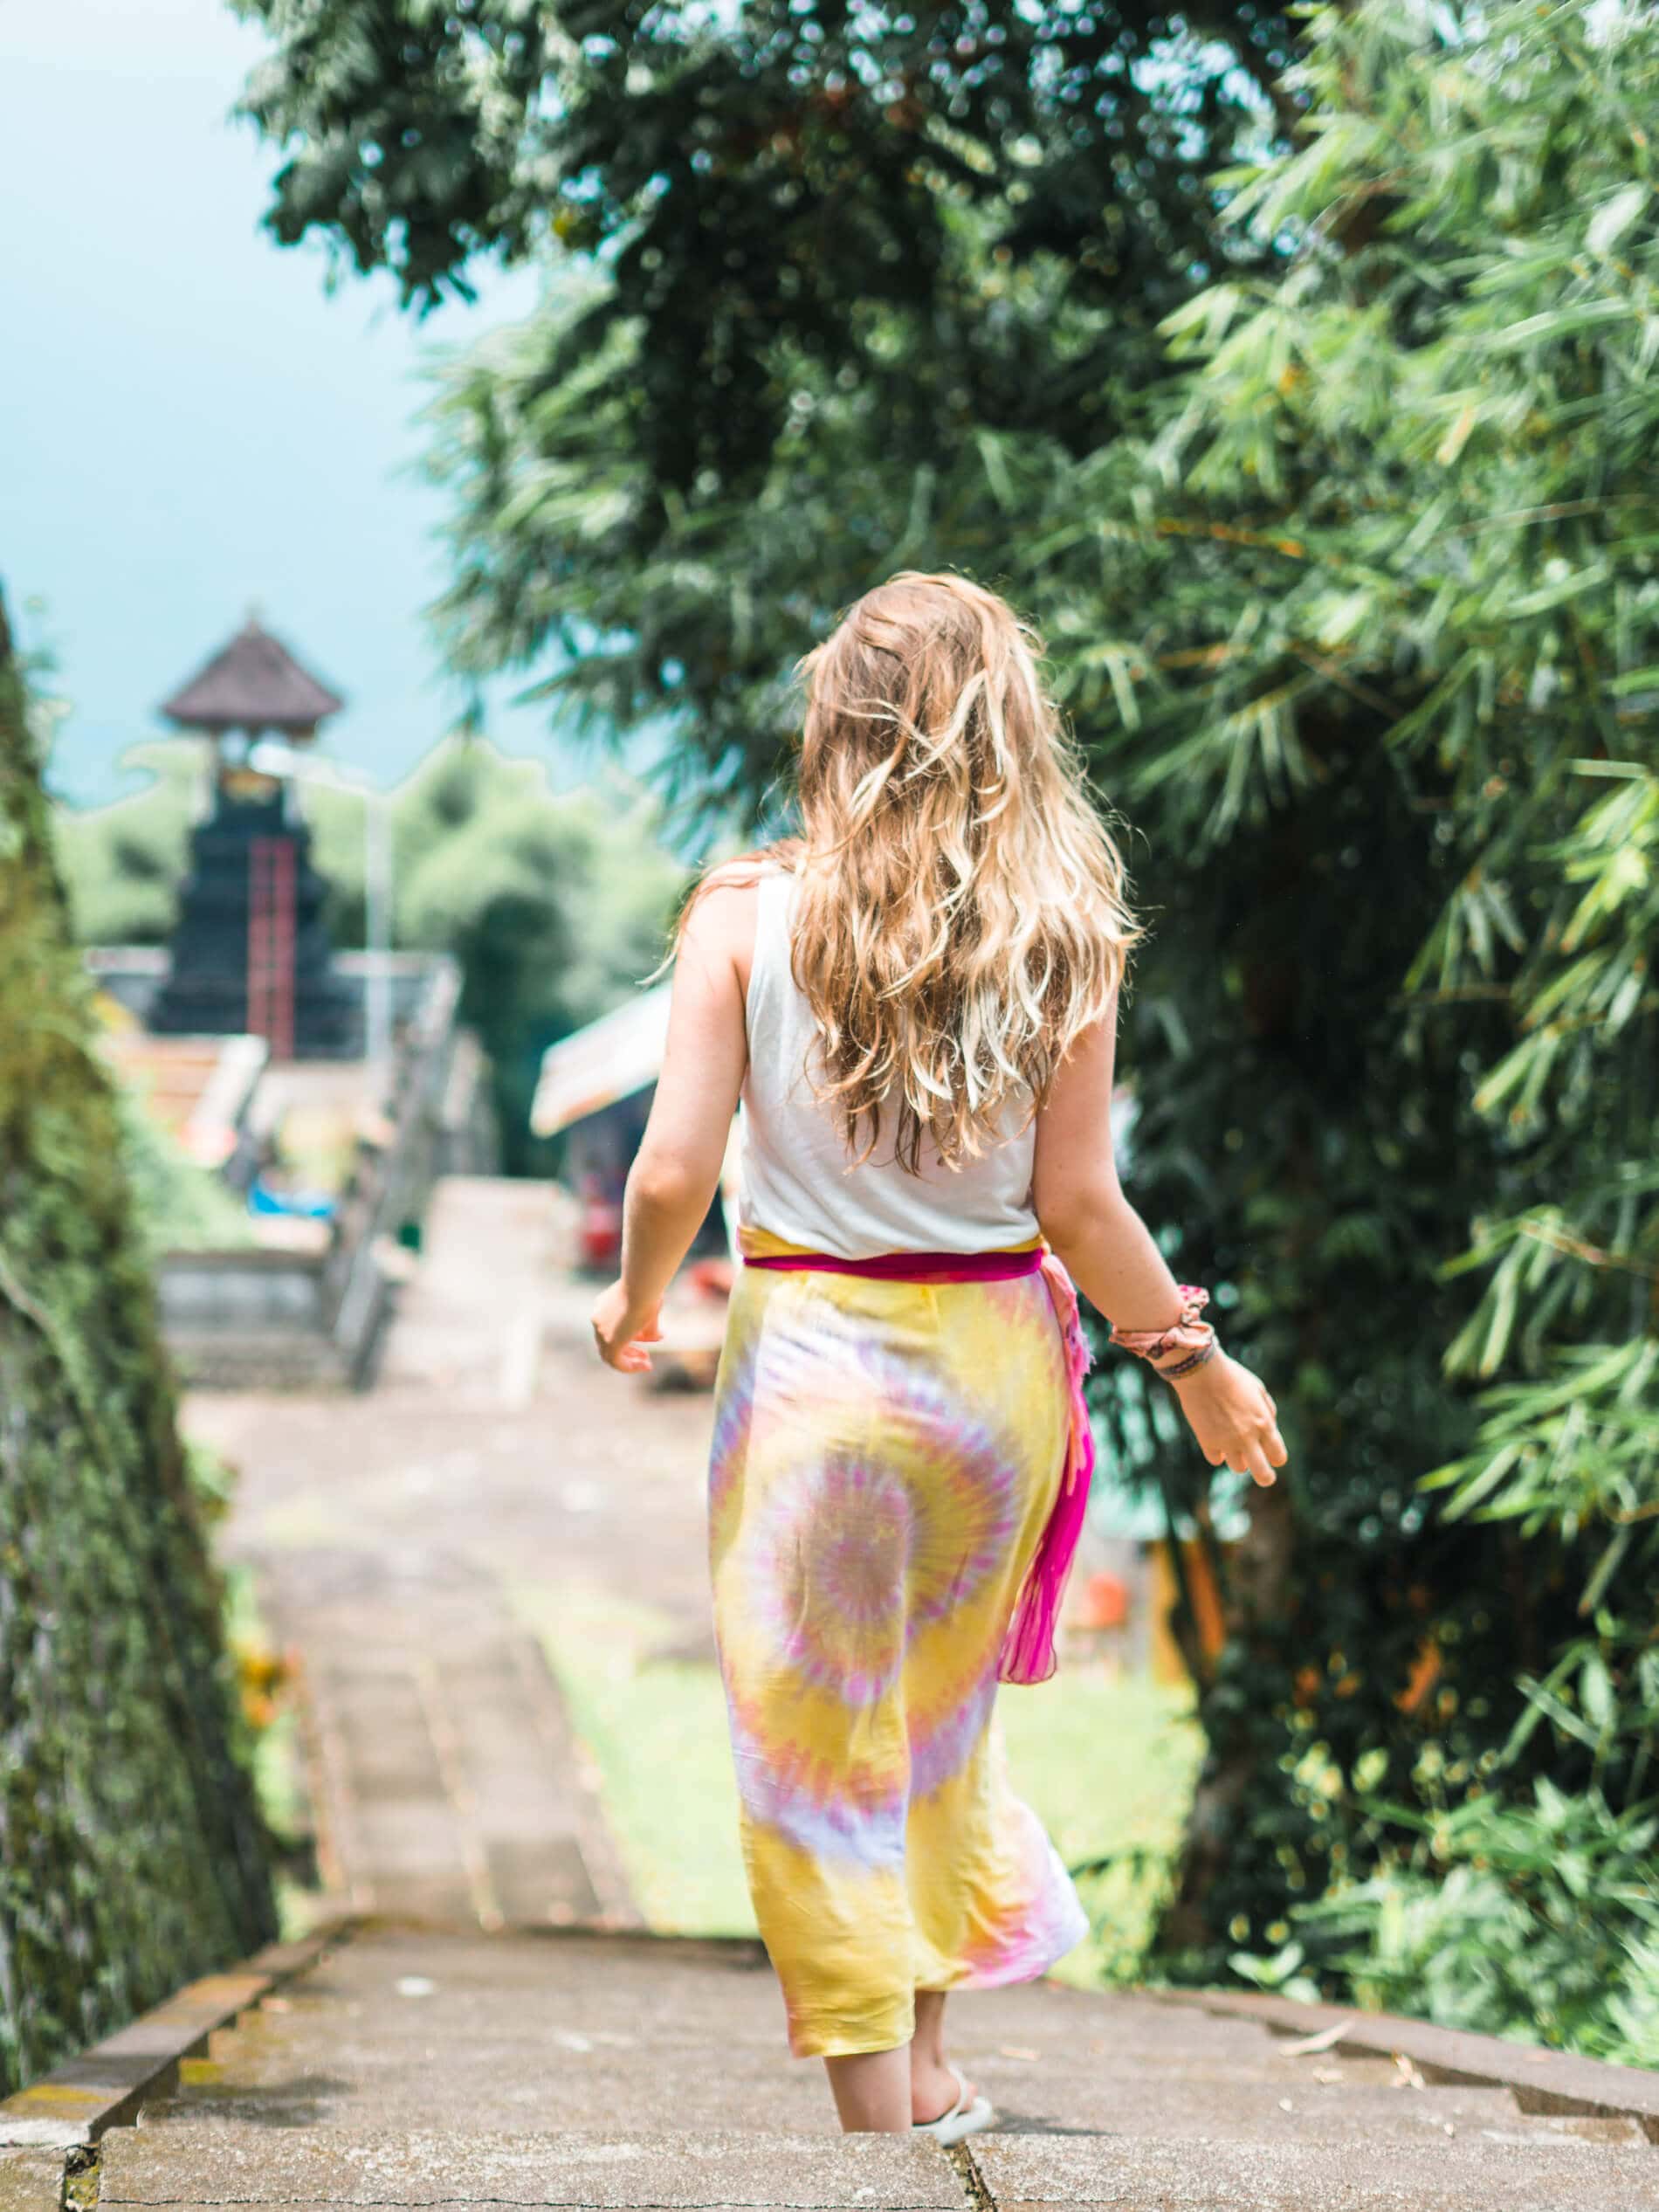 Everything you need to know before visiting Pura Lempuyang Temple in Bali: What to wear, how to get there, what to expect + why I think you should add Bali's most spectacular temple to your bucket list now